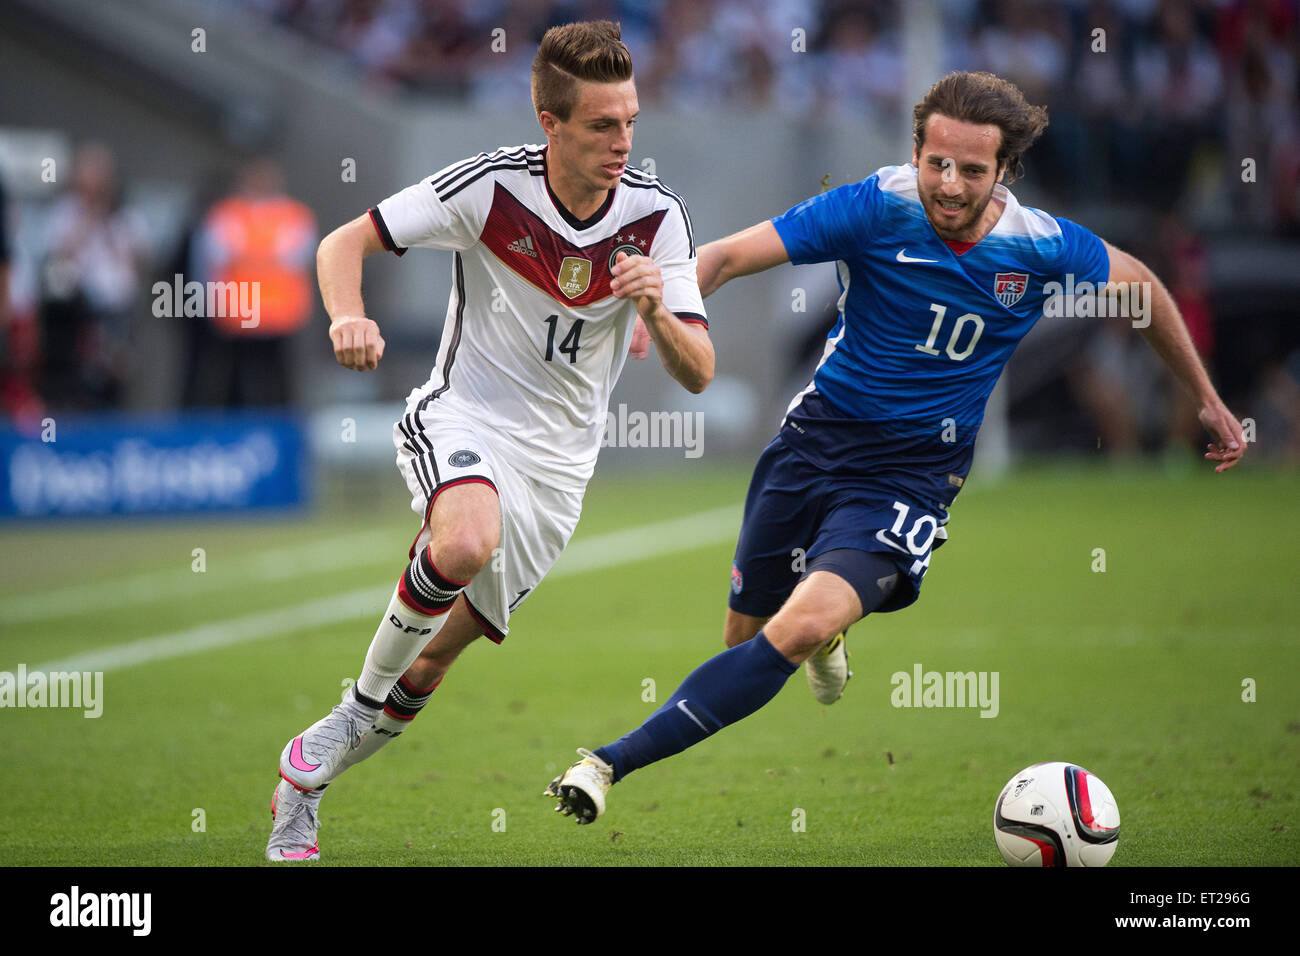 Cologne, Germany. 10th June, 2015. Germany's Patrick Herrmann (L) and the USA's vie for the ball Mix Diskerud during the international soccer match between Germany and the USA in the RheinEnergie Stadium in Cologne, Germany, 10 June 2015. Photo: Marius Becker/dpa/Alamy Live News Stock Photo